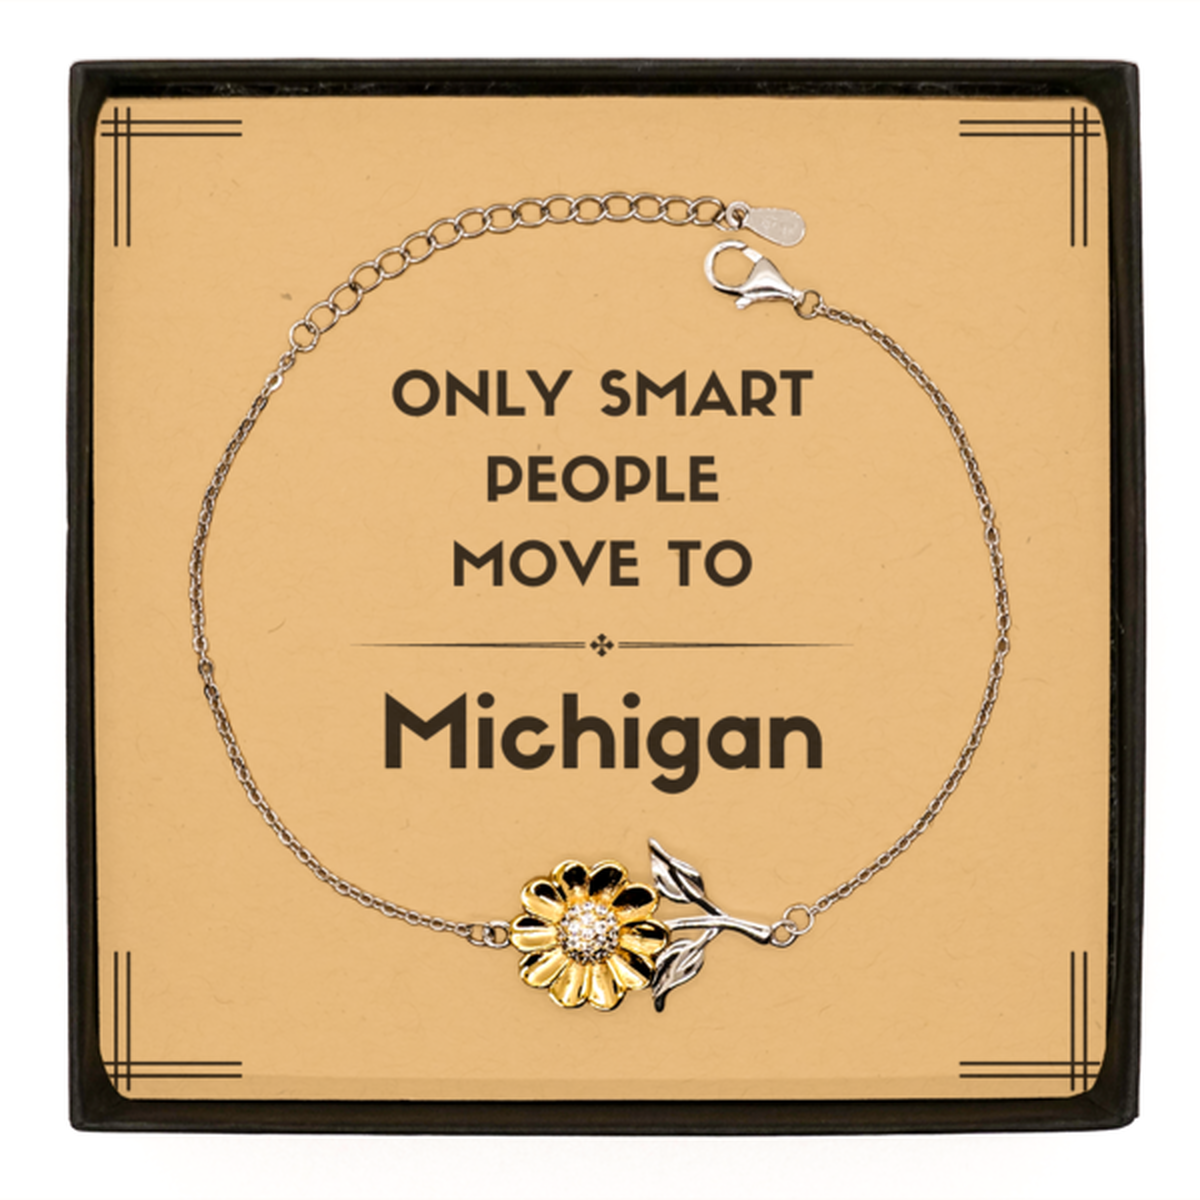 Only smart people move to Michigan Sunflower Bracelet, Message Card Gifts For Michigan, Move to Michigan Gifts for Friends Coworker Funny Saying Quote